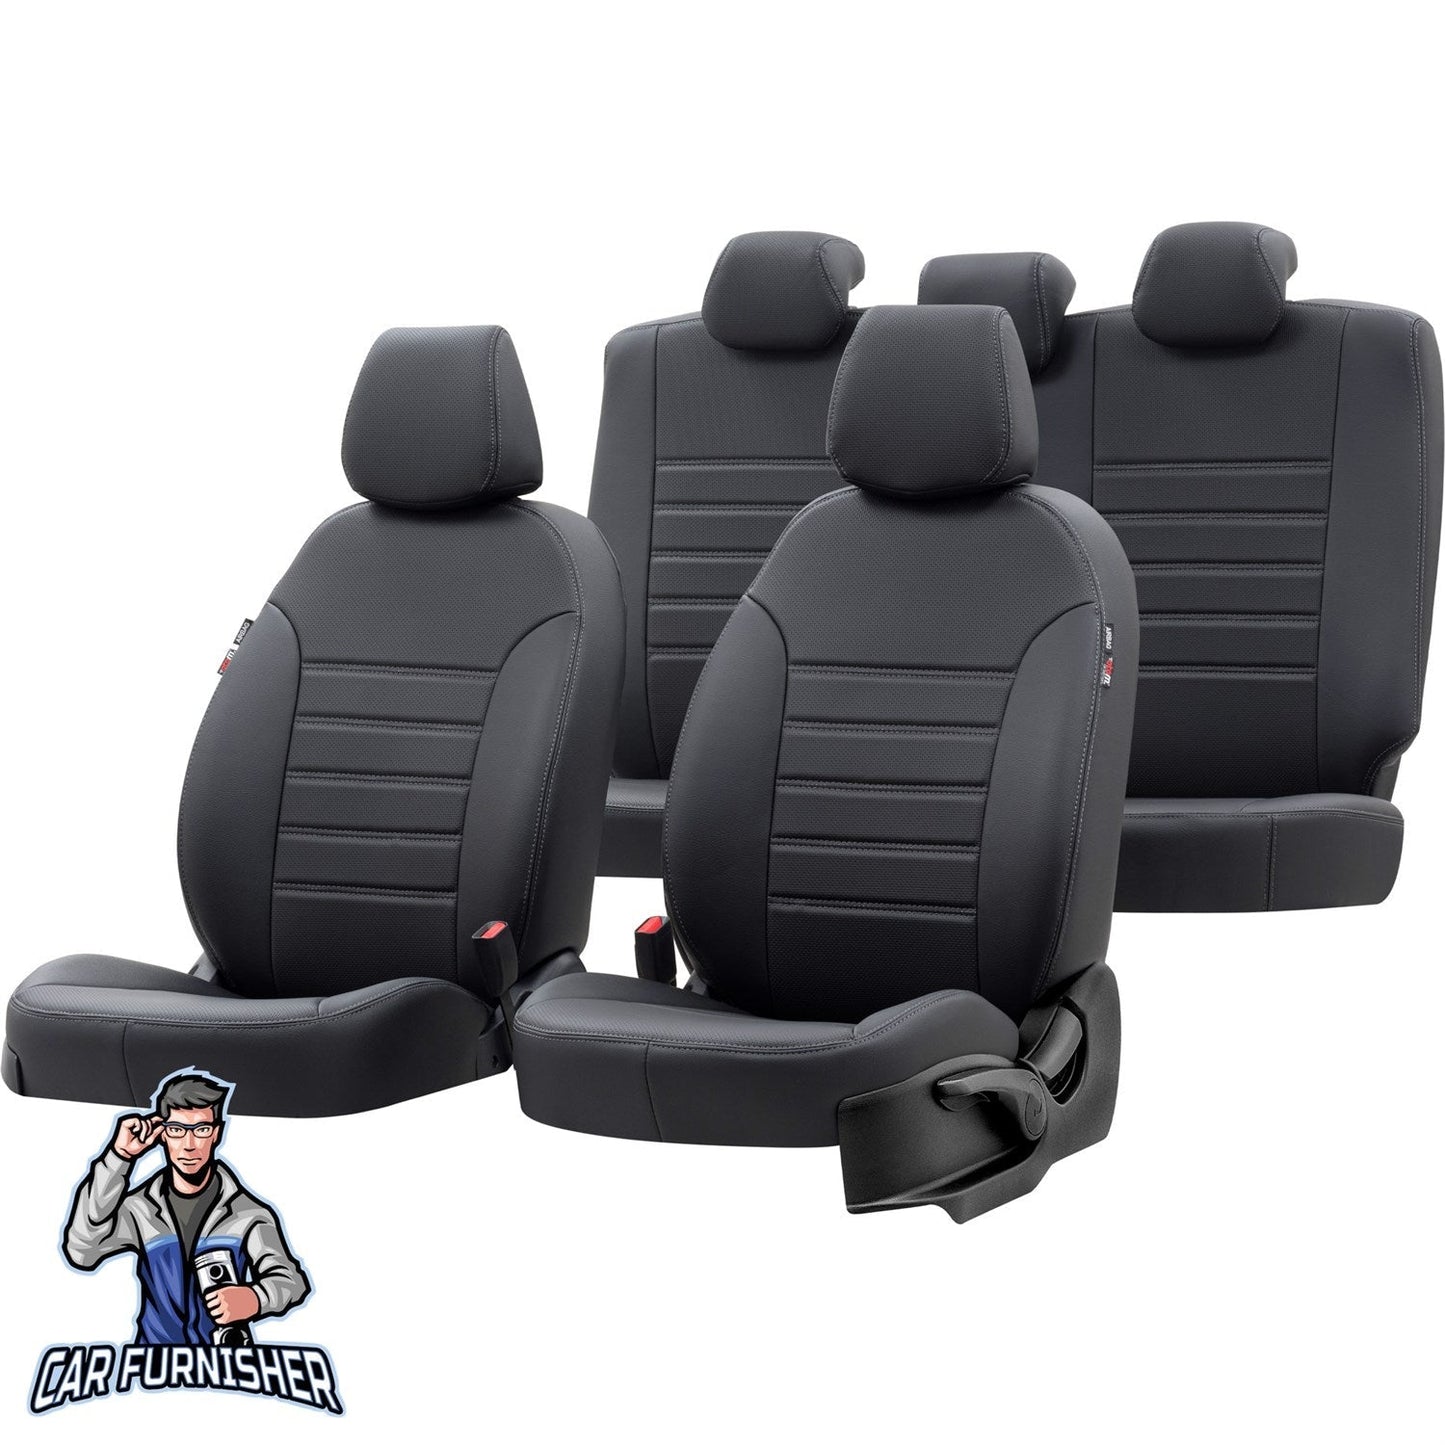 Fiat Fullback Seat Covers New York Leather Design Black Leather